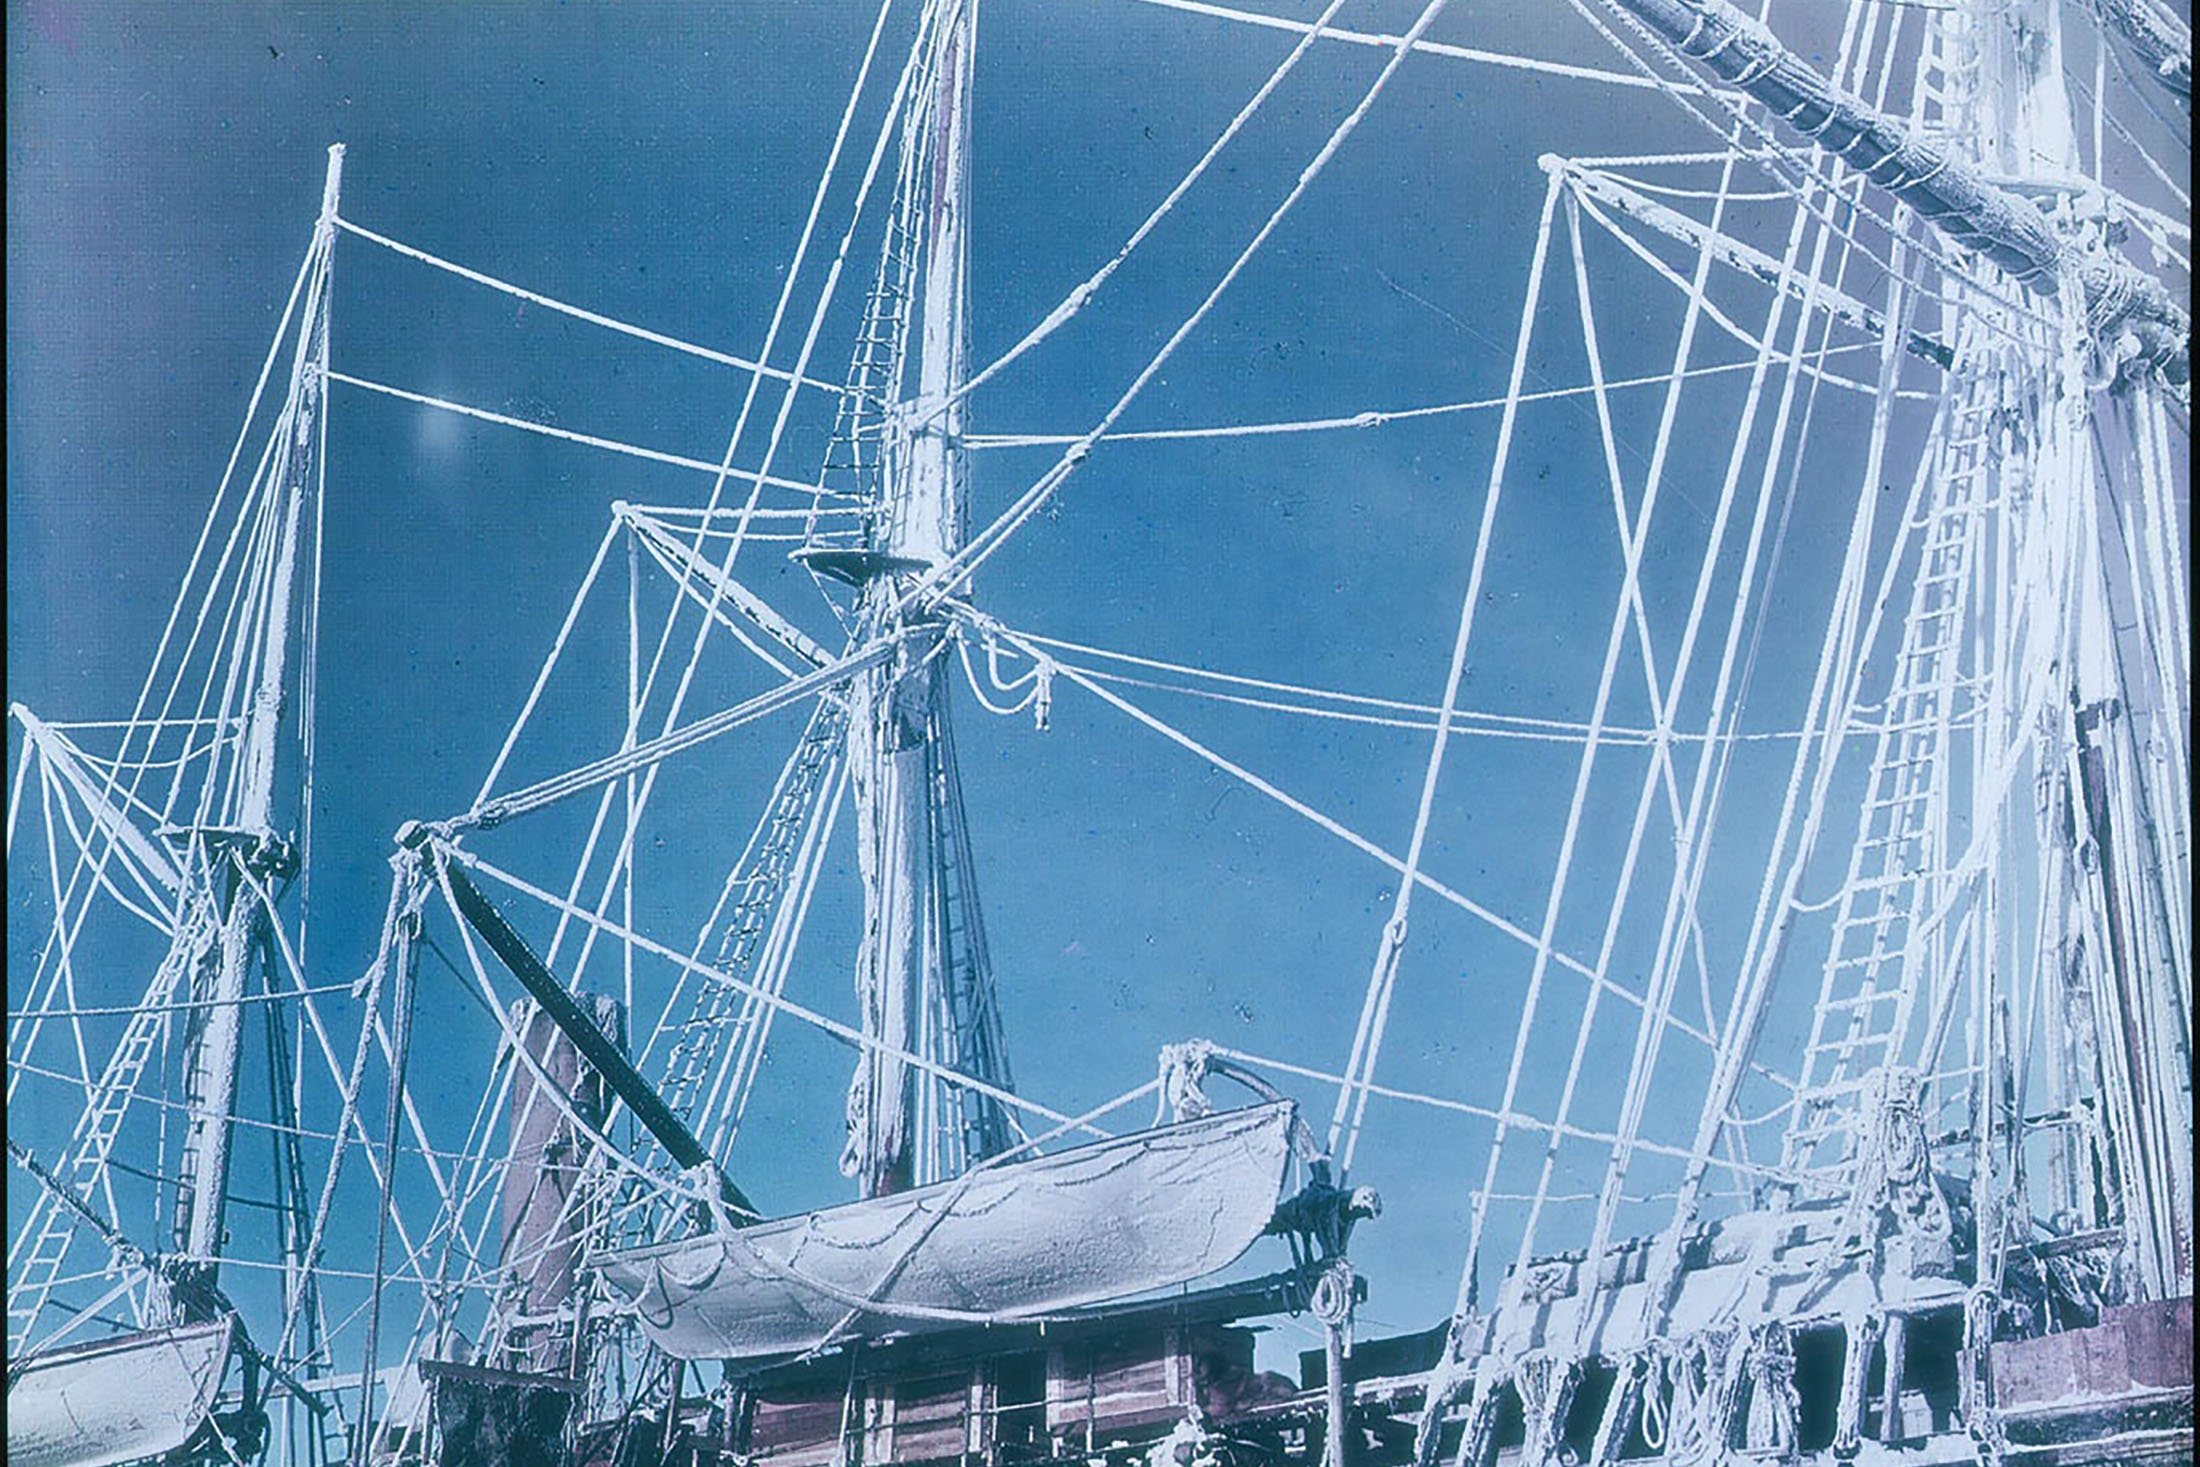 The rigging of the frozen 